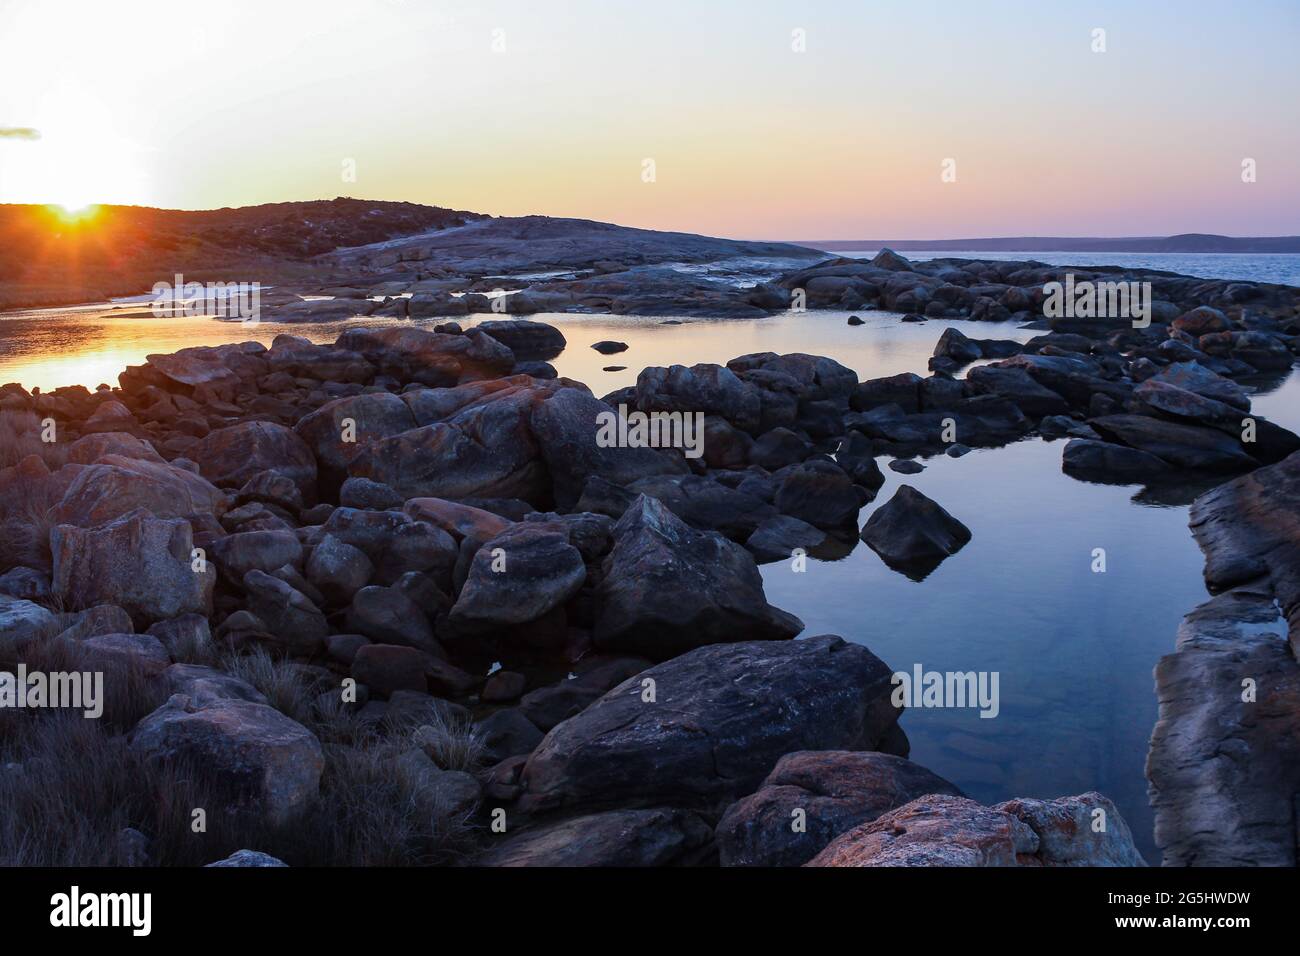 Landscape view of rockpools at sunset, taken at Two People's Bay in Western Australia's Great Southern Region. Stock Photo